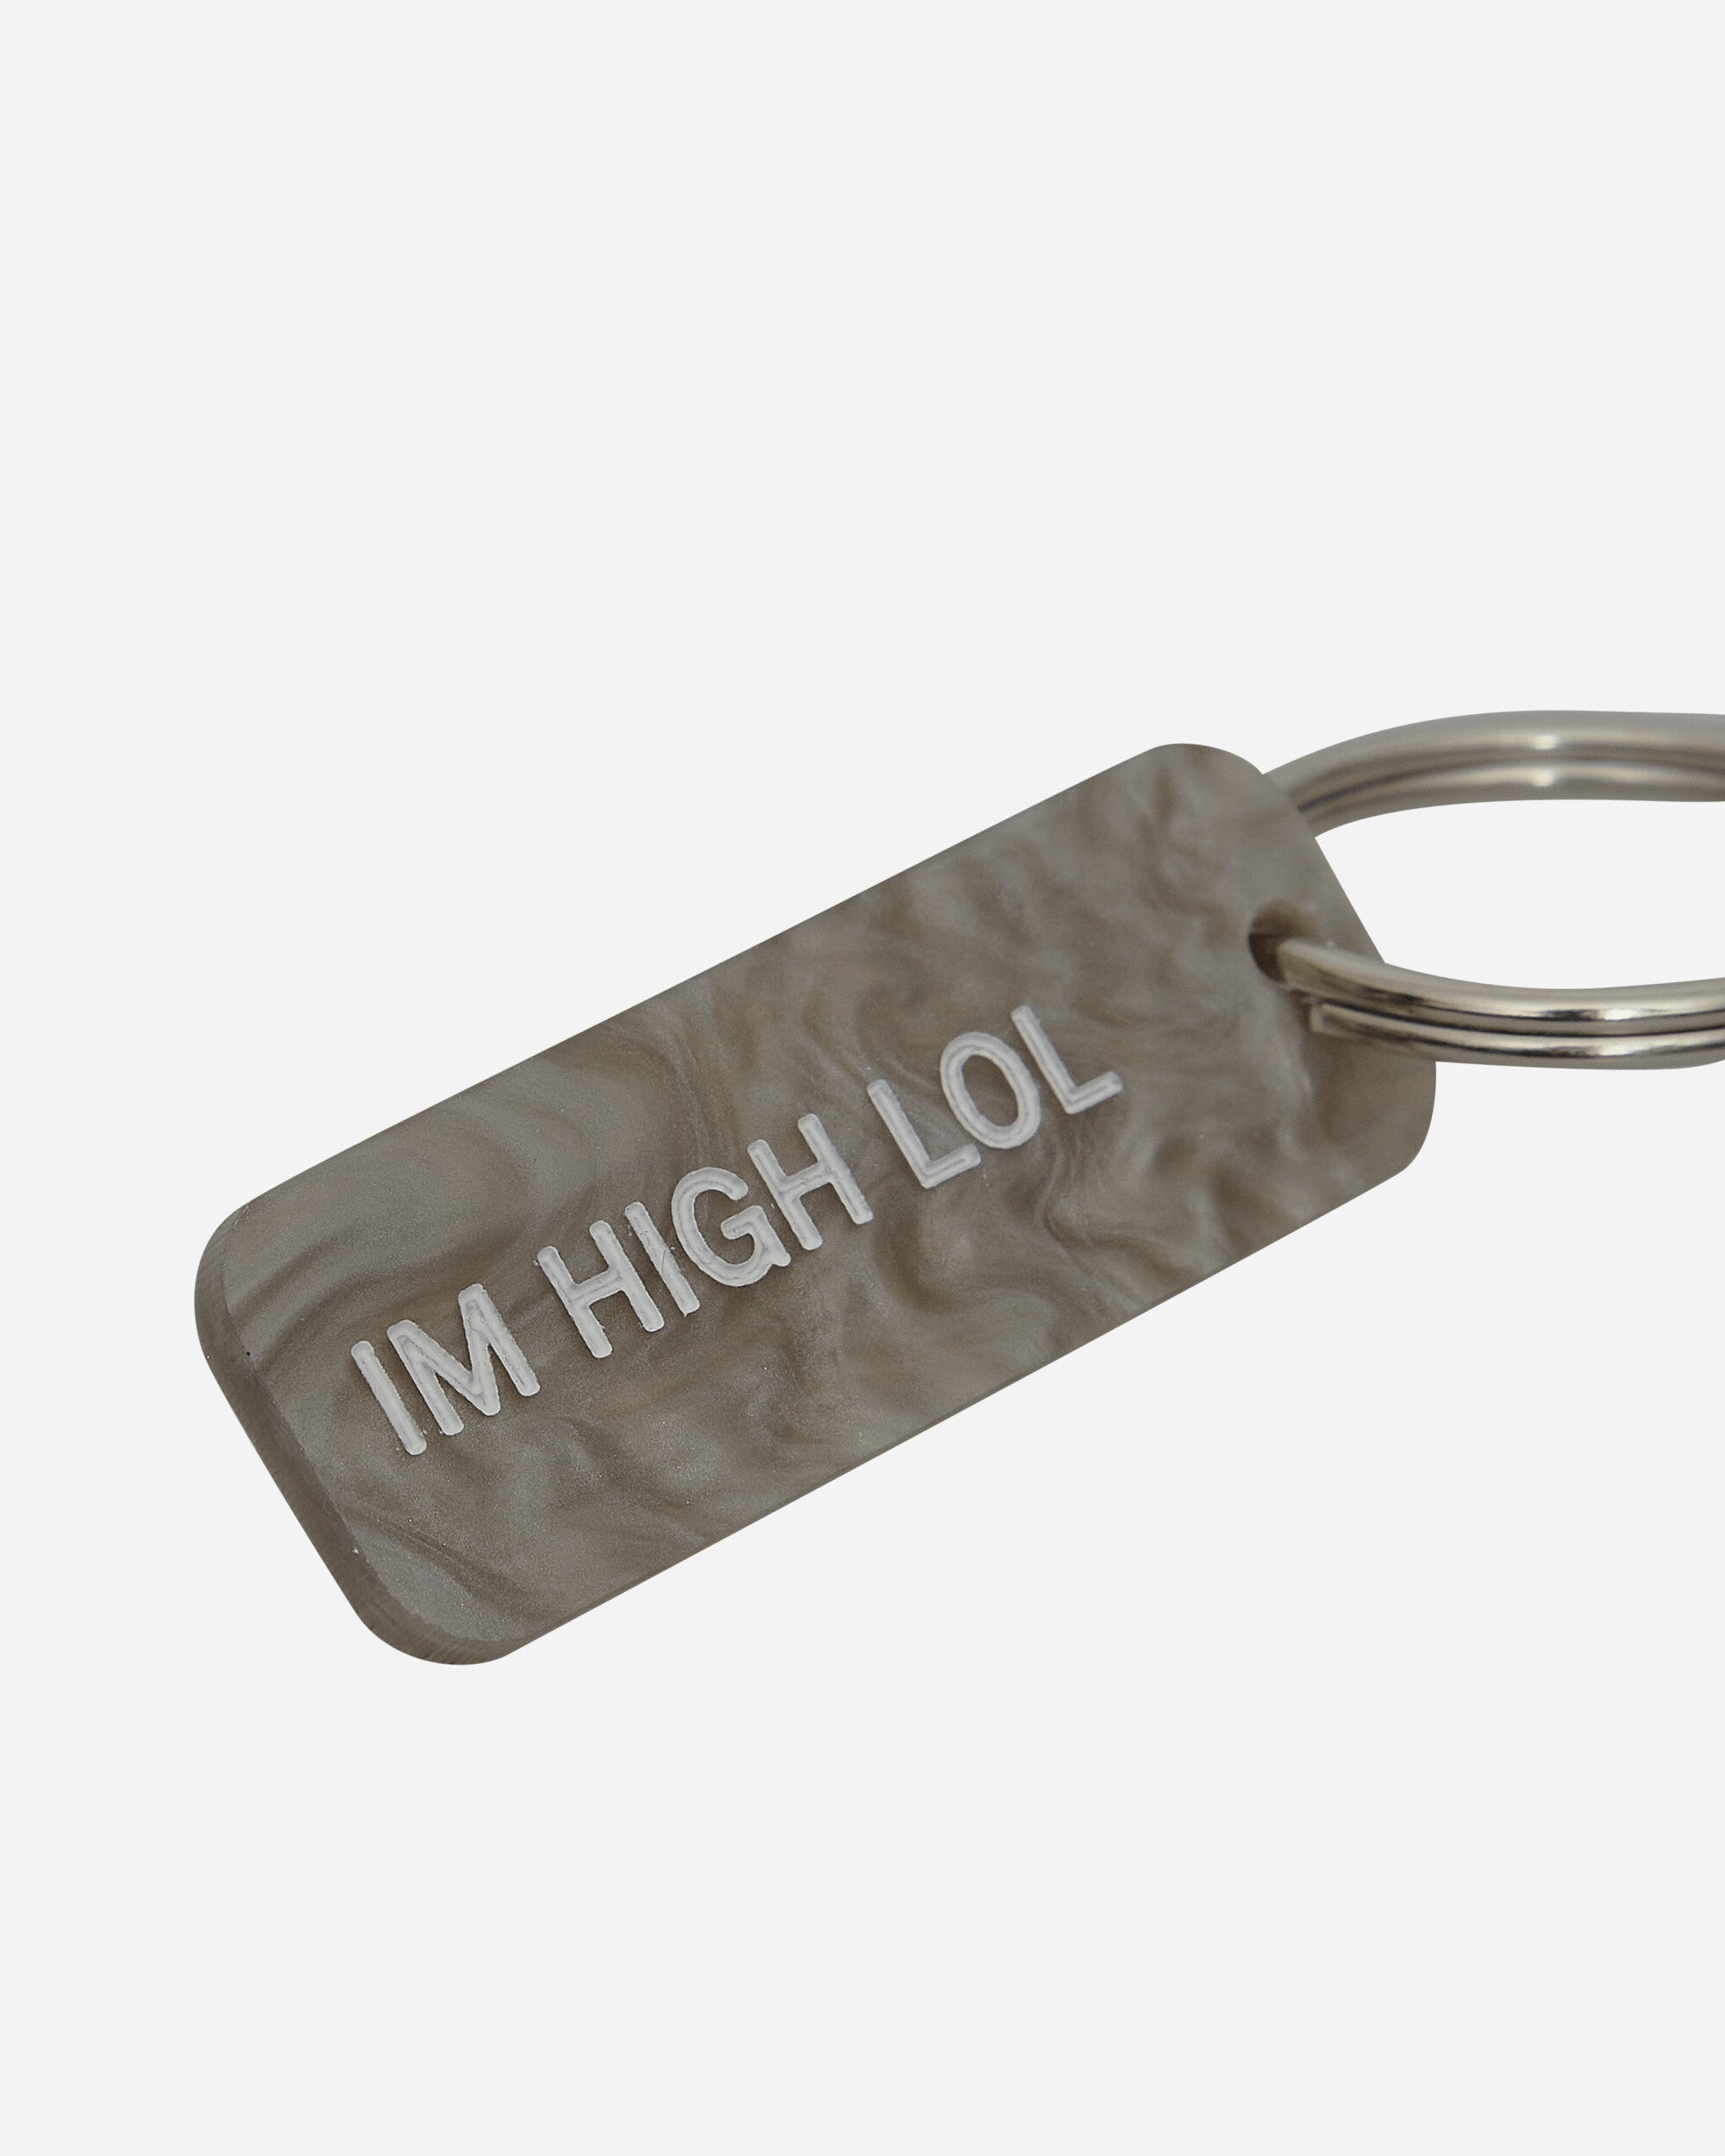 Mister Green Keychain - I'M High Lol/Mister Green Mercury Small Accessories Keychains MG-X1464 MCY